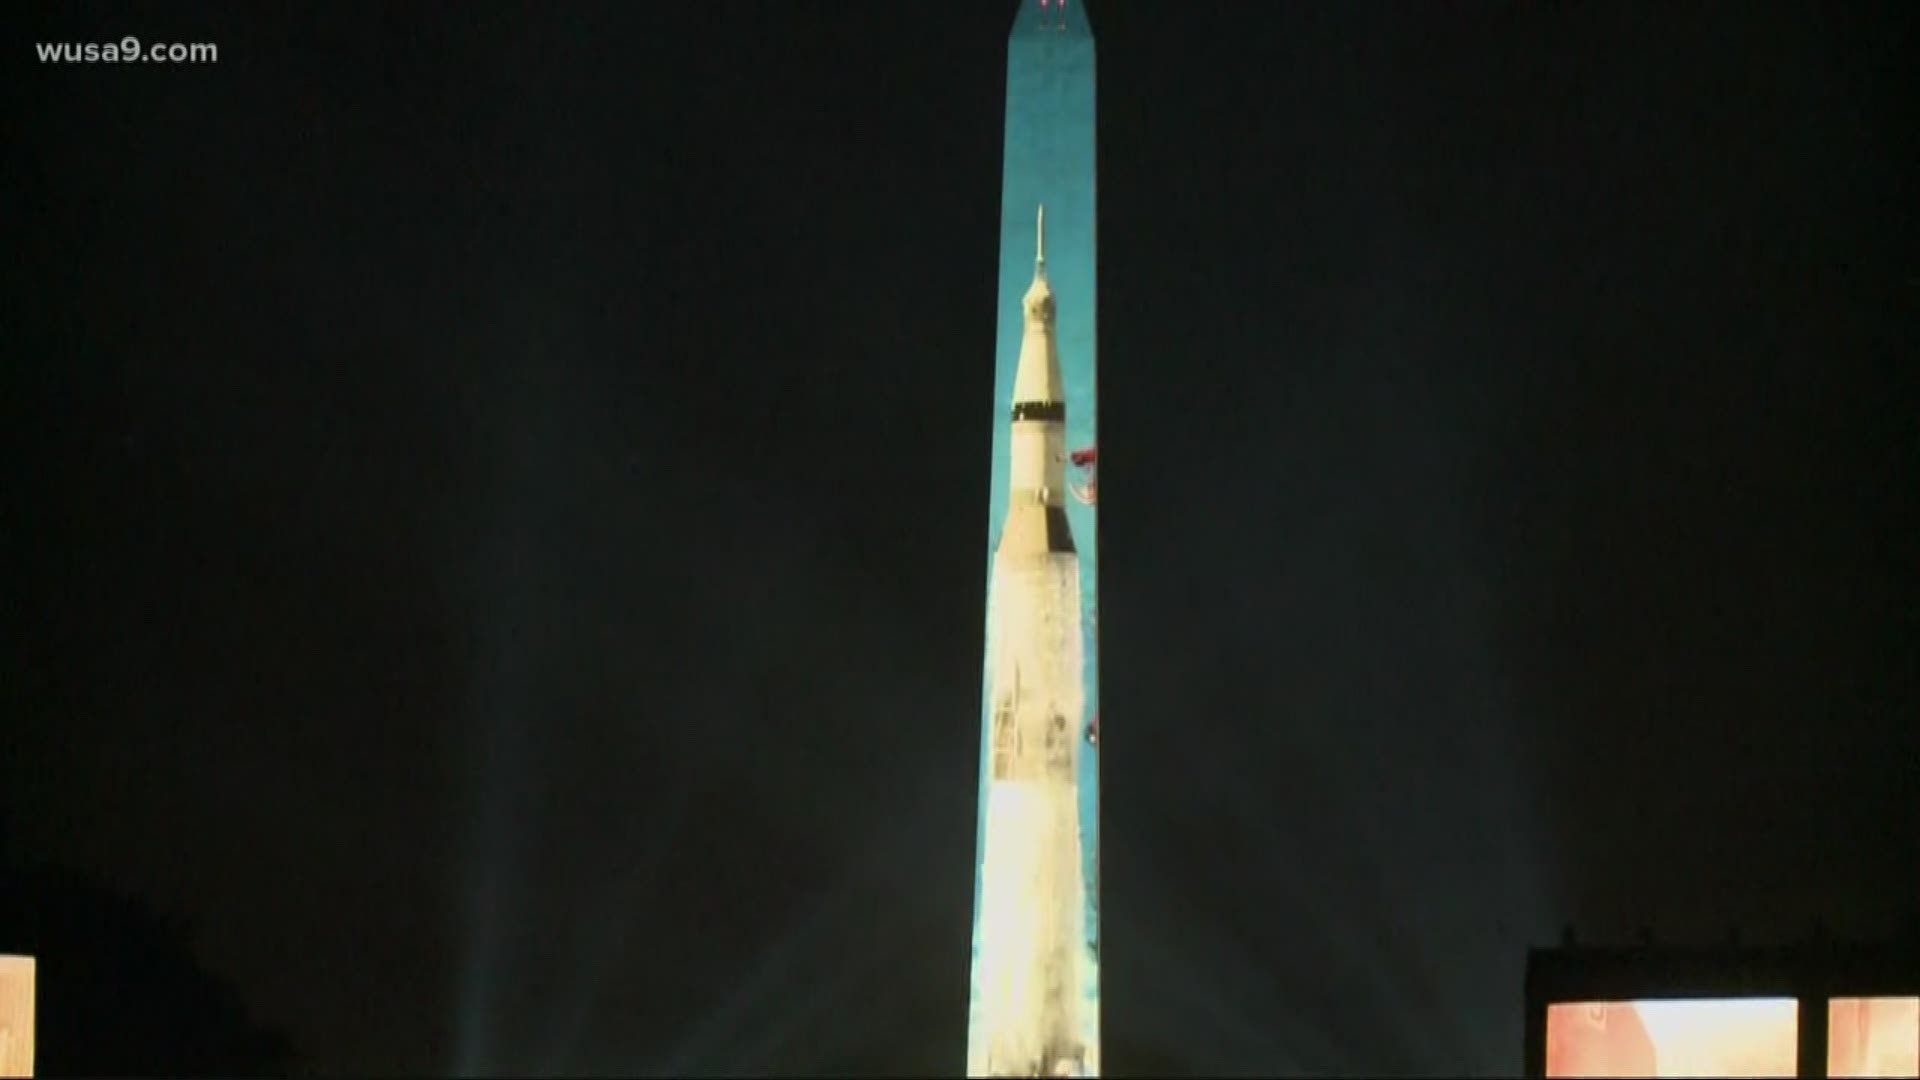 After projecting the rocket onto the monument all week, the museum launched - literally and figuratively - their 17 minute show from National Mall on Friday night. It's titled "Apollo 50: Go for the Moon."